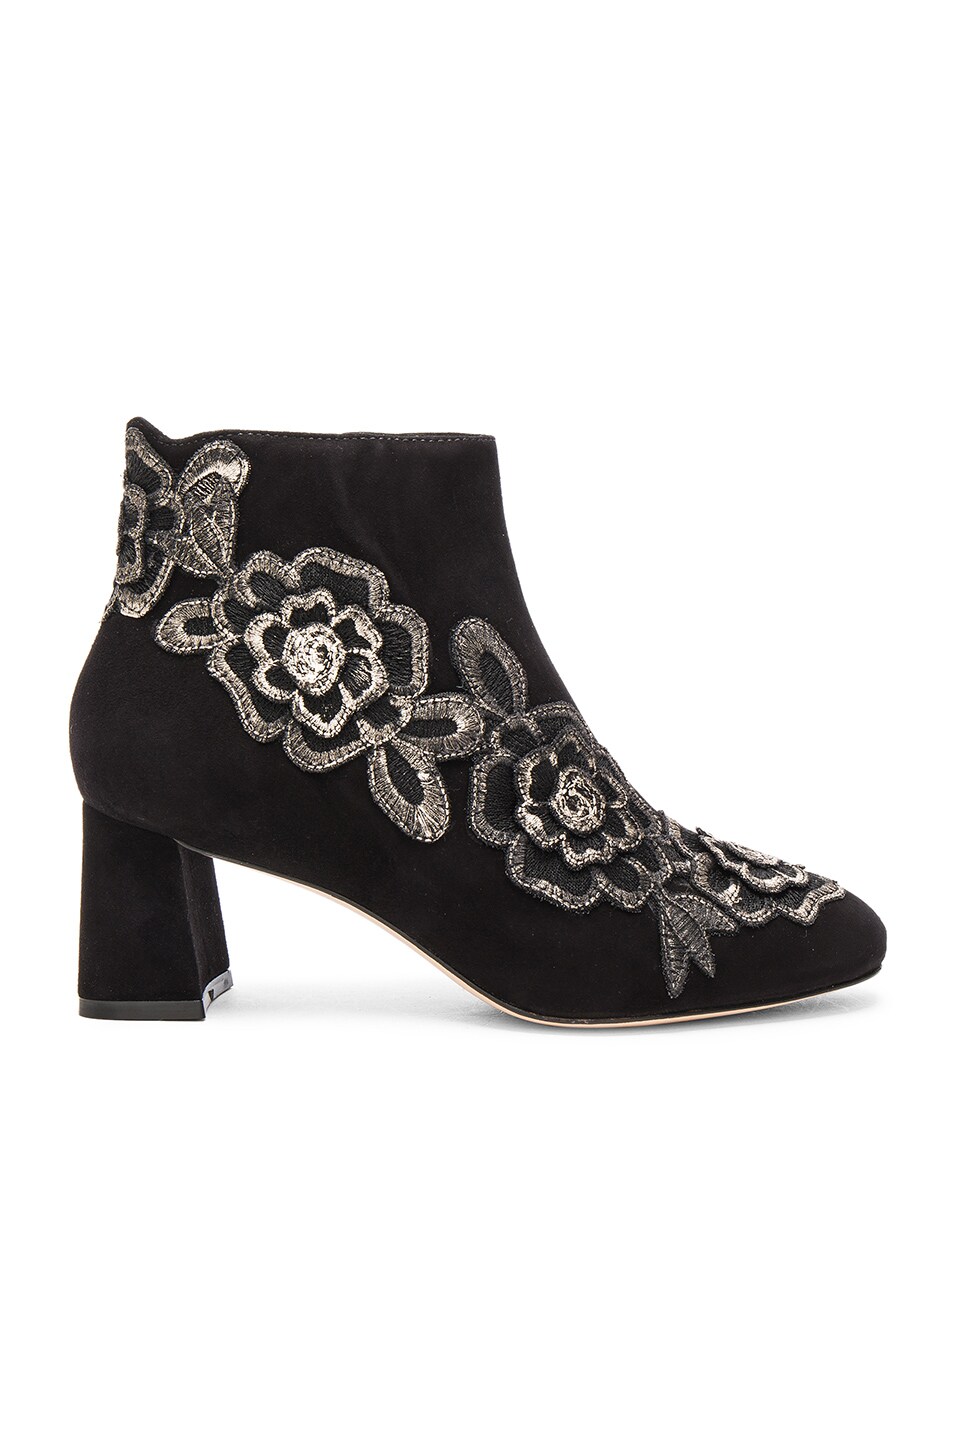 Image 1 of Sophia Webster Suede Winona Mid Ankle Booties in Black & Gold